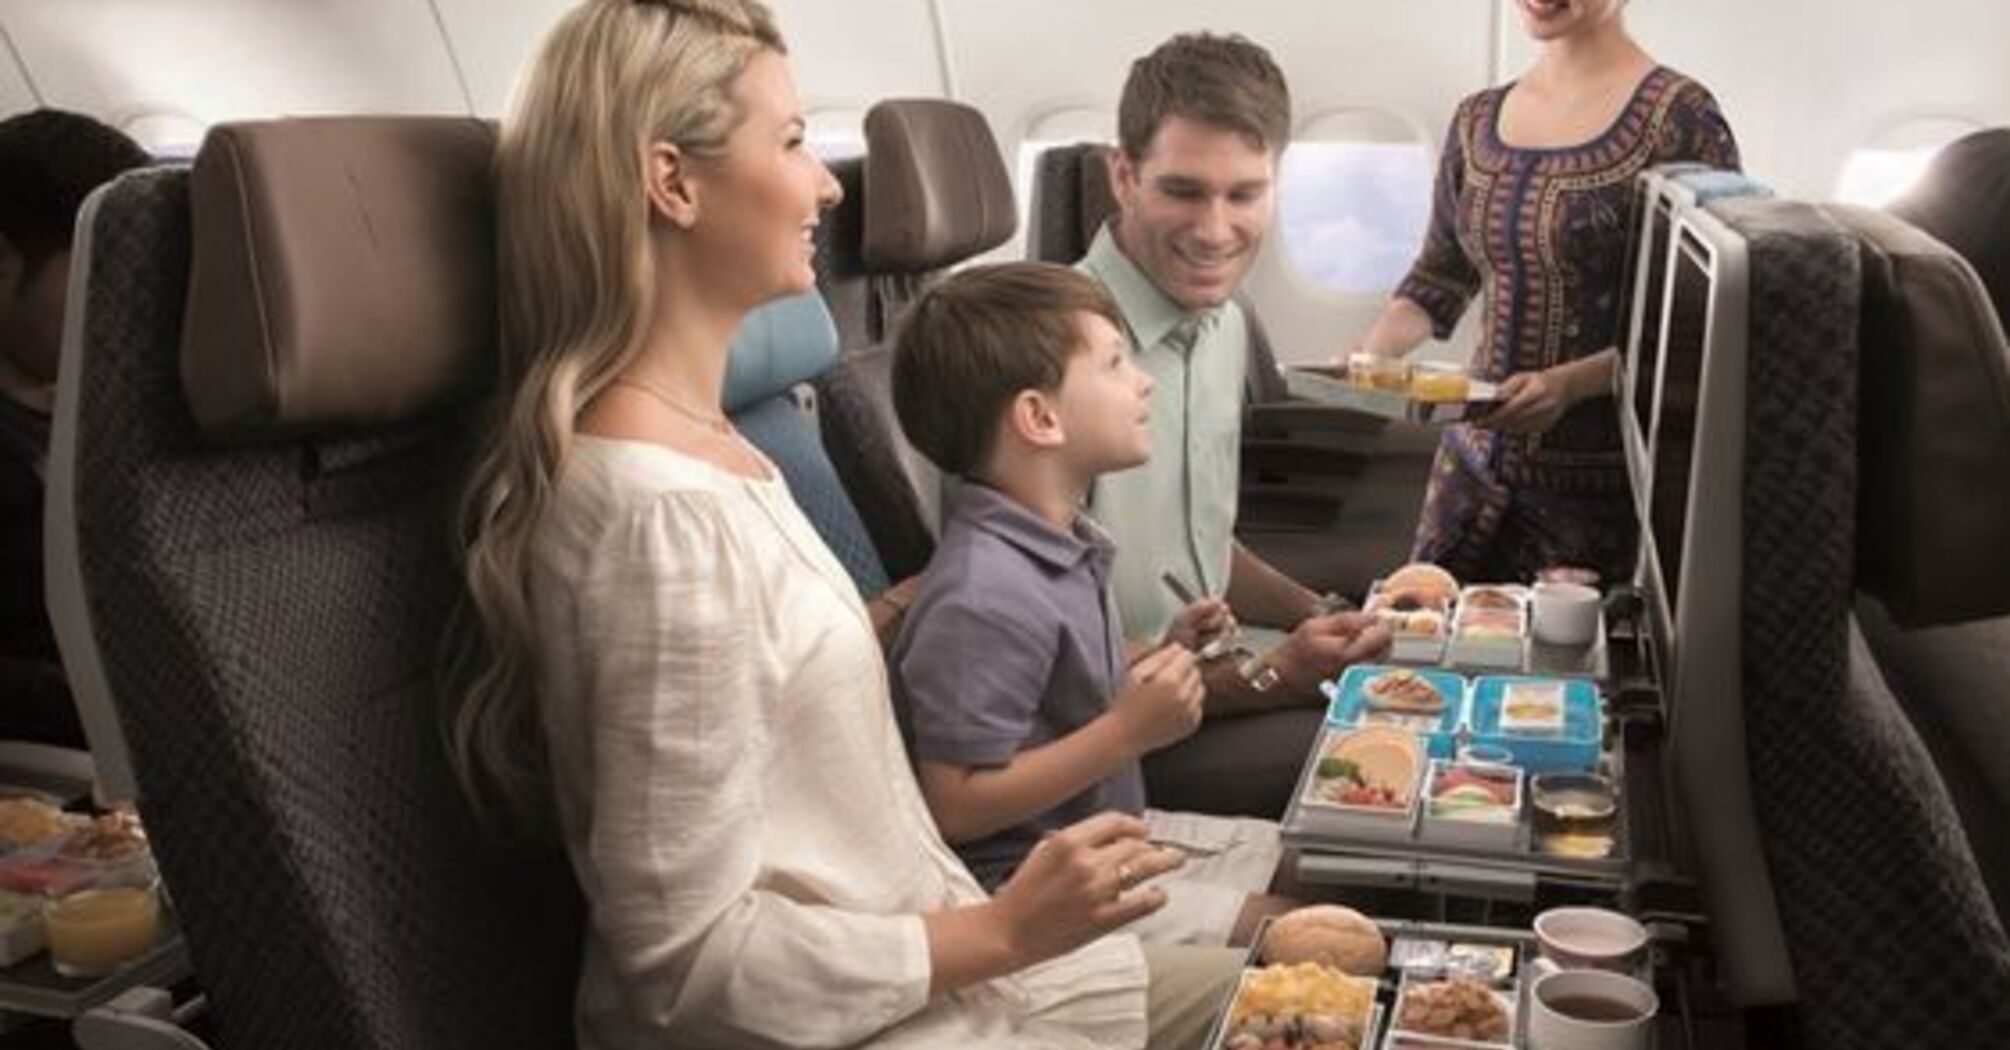 They will amaze you: 10 requests flight attendants won't be able to fulfill